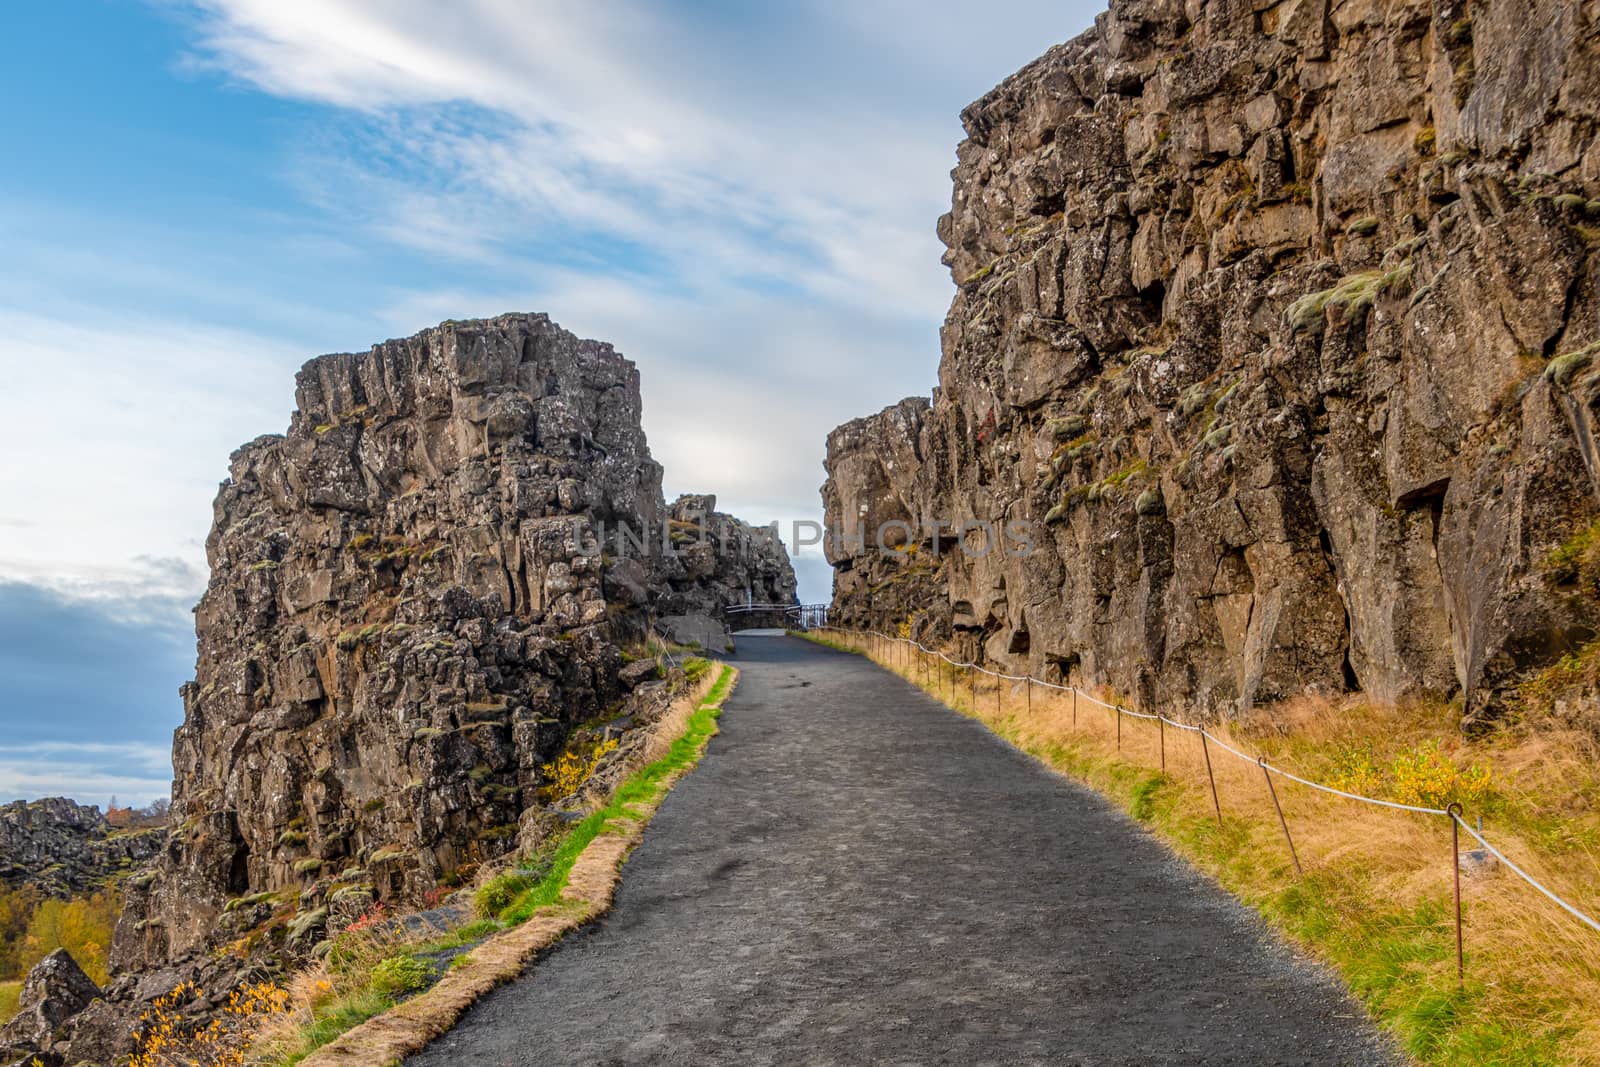 Thingvellir National Park in Iceland during sunny weather hiking path through a canyon